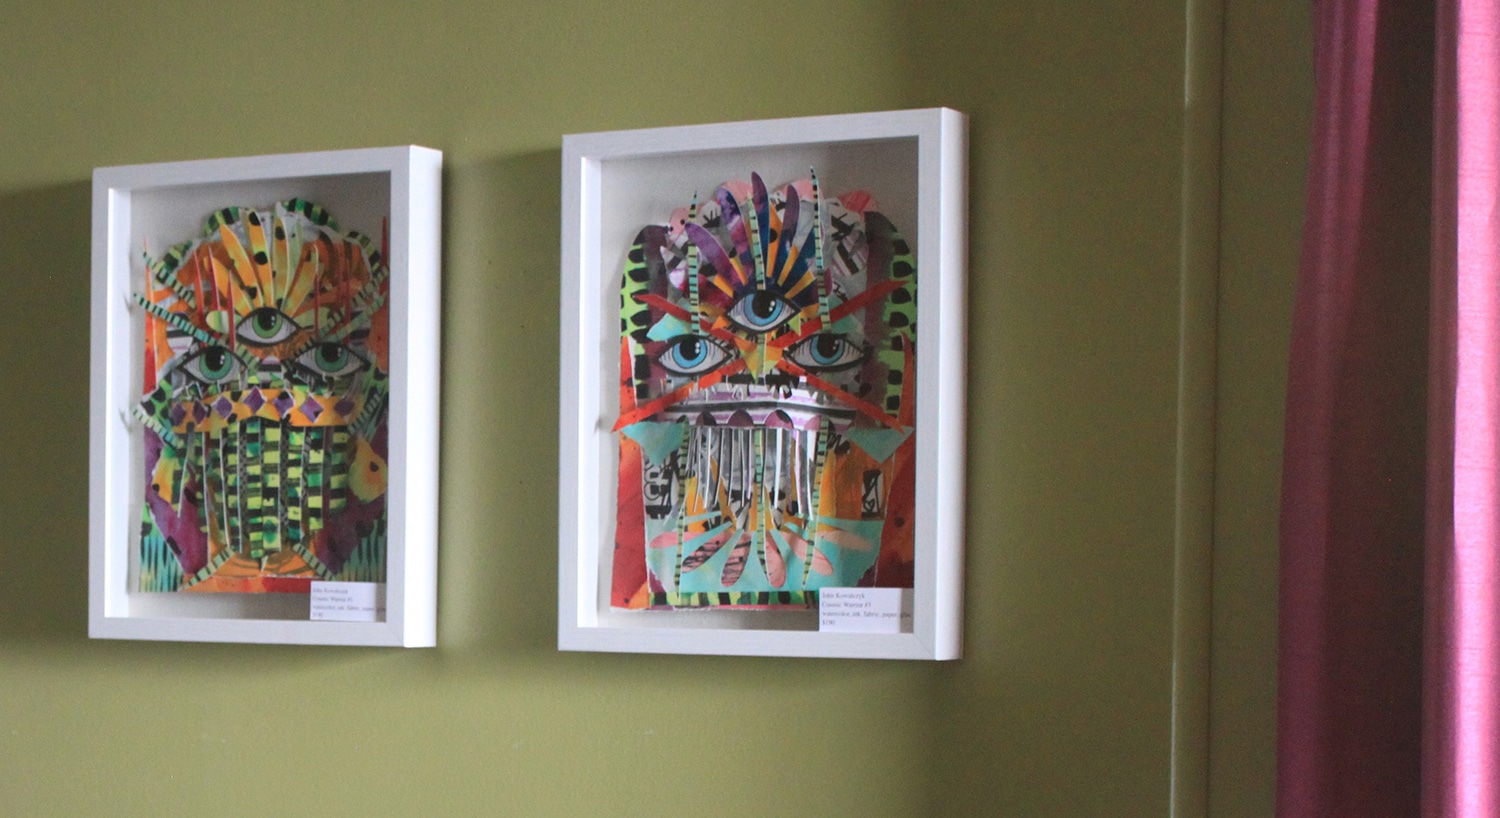 Two white-framed mixed-media artworks made from paper and pigment.